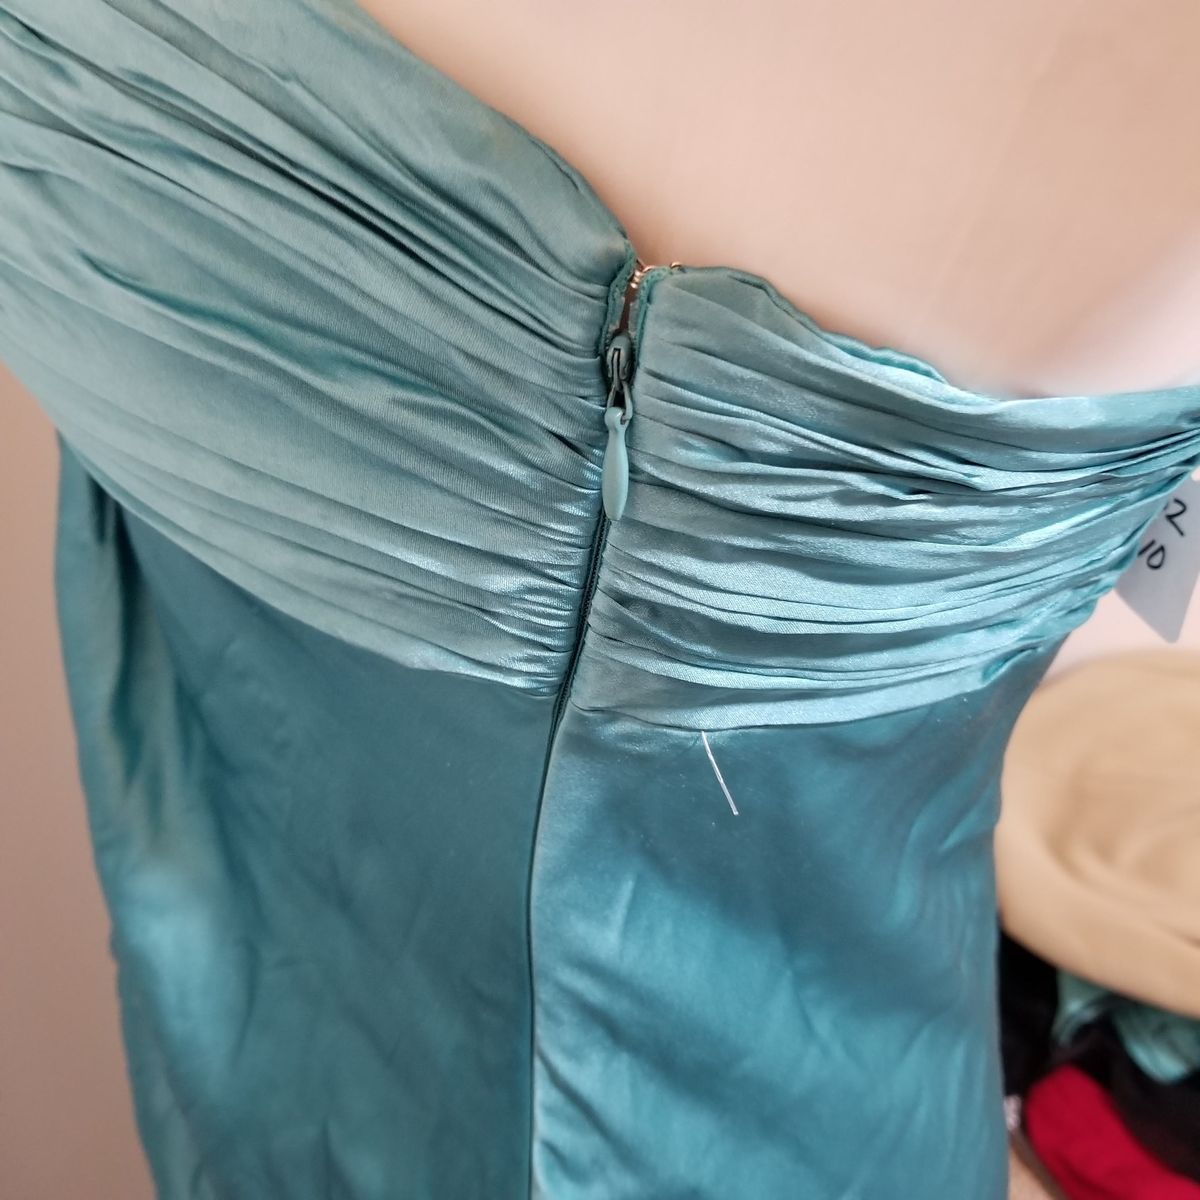 Laundry by Shelli Segal Size 10 Strapless Satin Turquoise Blue A-line Dress on Queenly